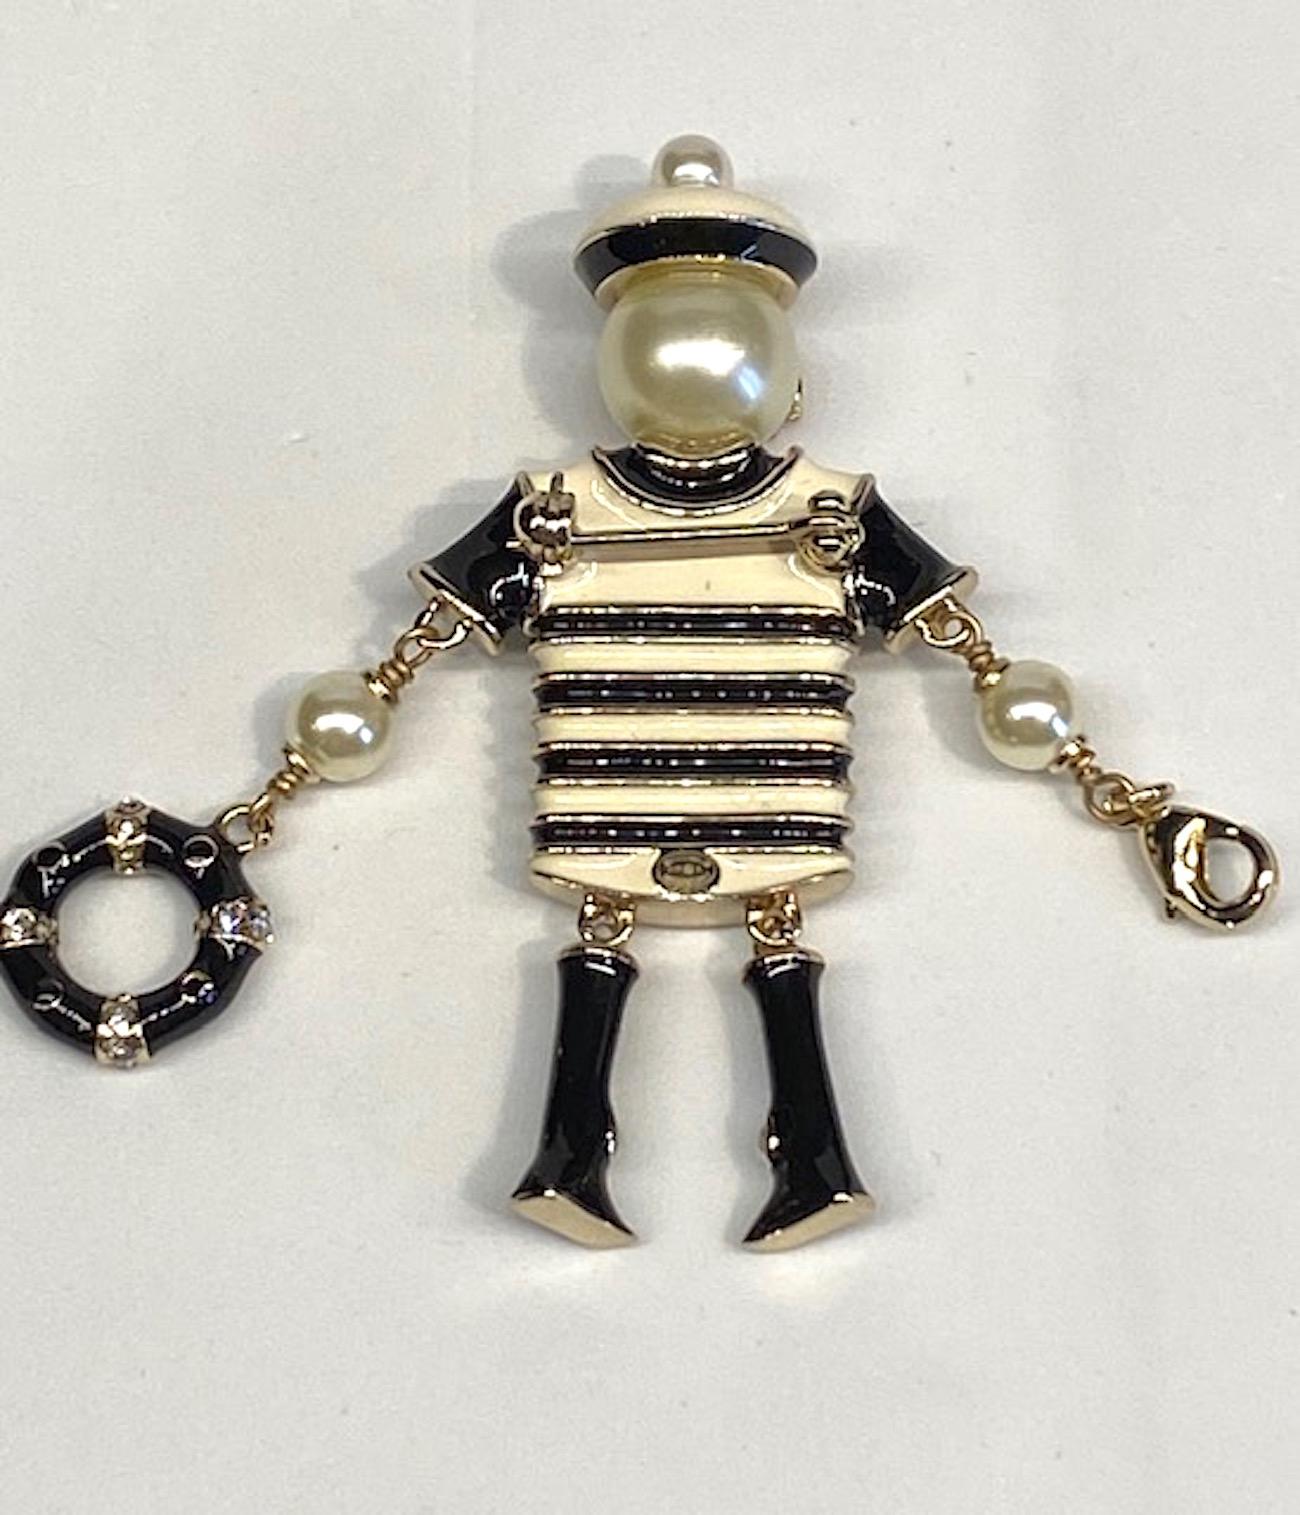 A charming Chanel figural pin with nautical interpretation of Madame Coco Chanel in a beret. The gold plate brooch is enameled in ivory, black and pink. The Chanel iconic interlocking CC logo is set with rhinestones. The head is a large faux pearl